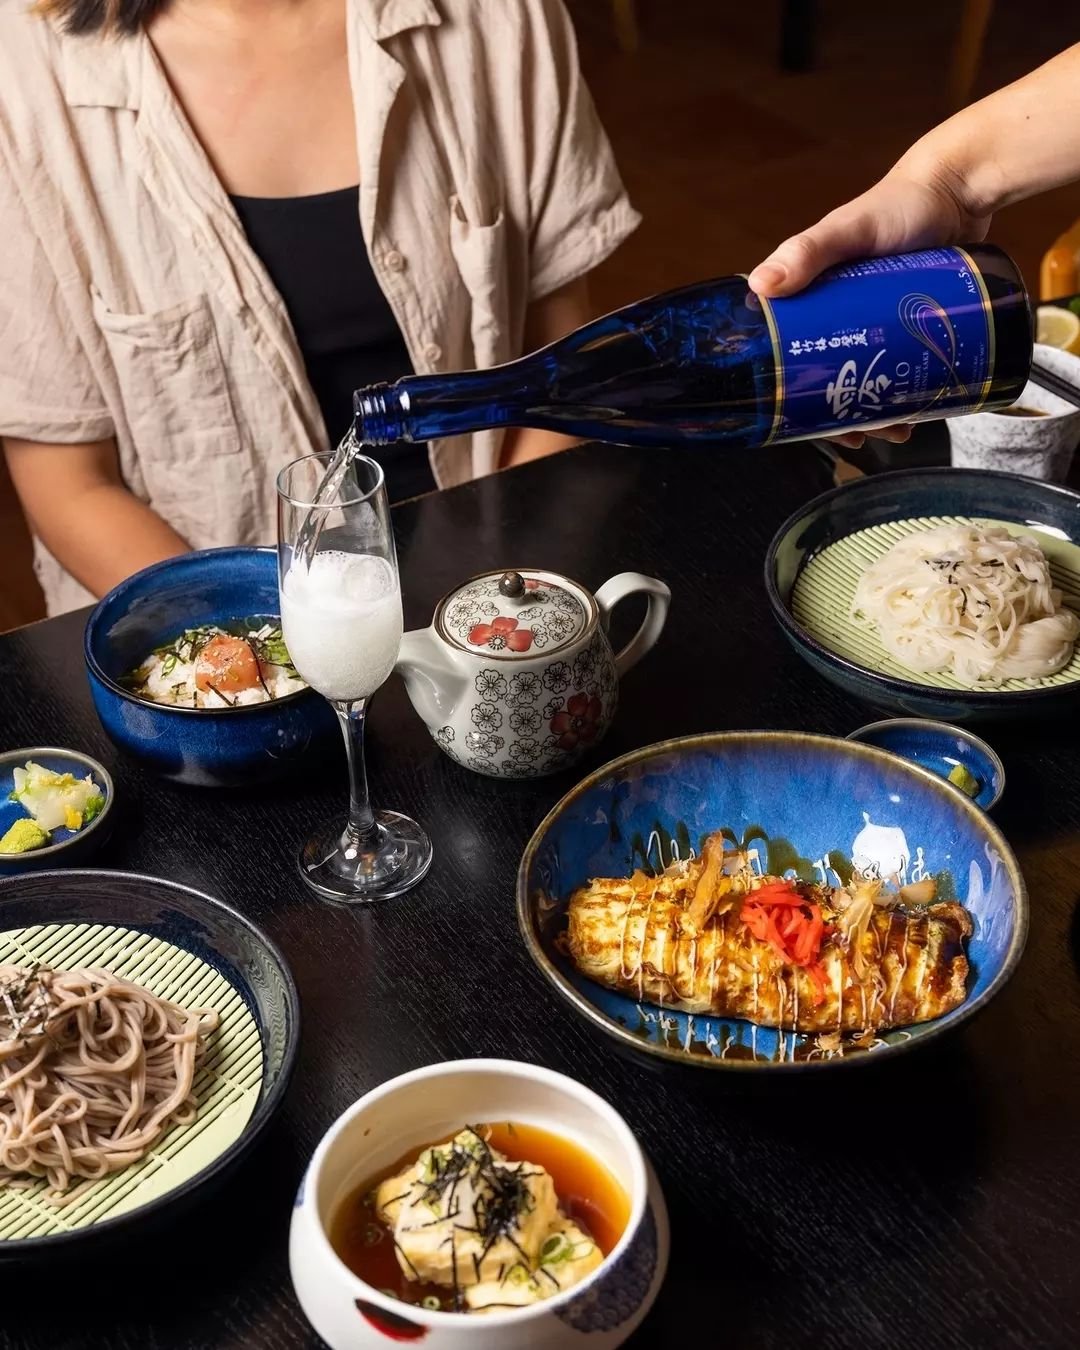 Treat Mum to Mother's Day at Hayashi this Sunday.

Enjoy a delicious Mother&rsquo;s Day menu with your family starring our favourites. Mum will enjoy a complimentary Mio Sparkling Sake. The little ones will love it too with a special menu just for th